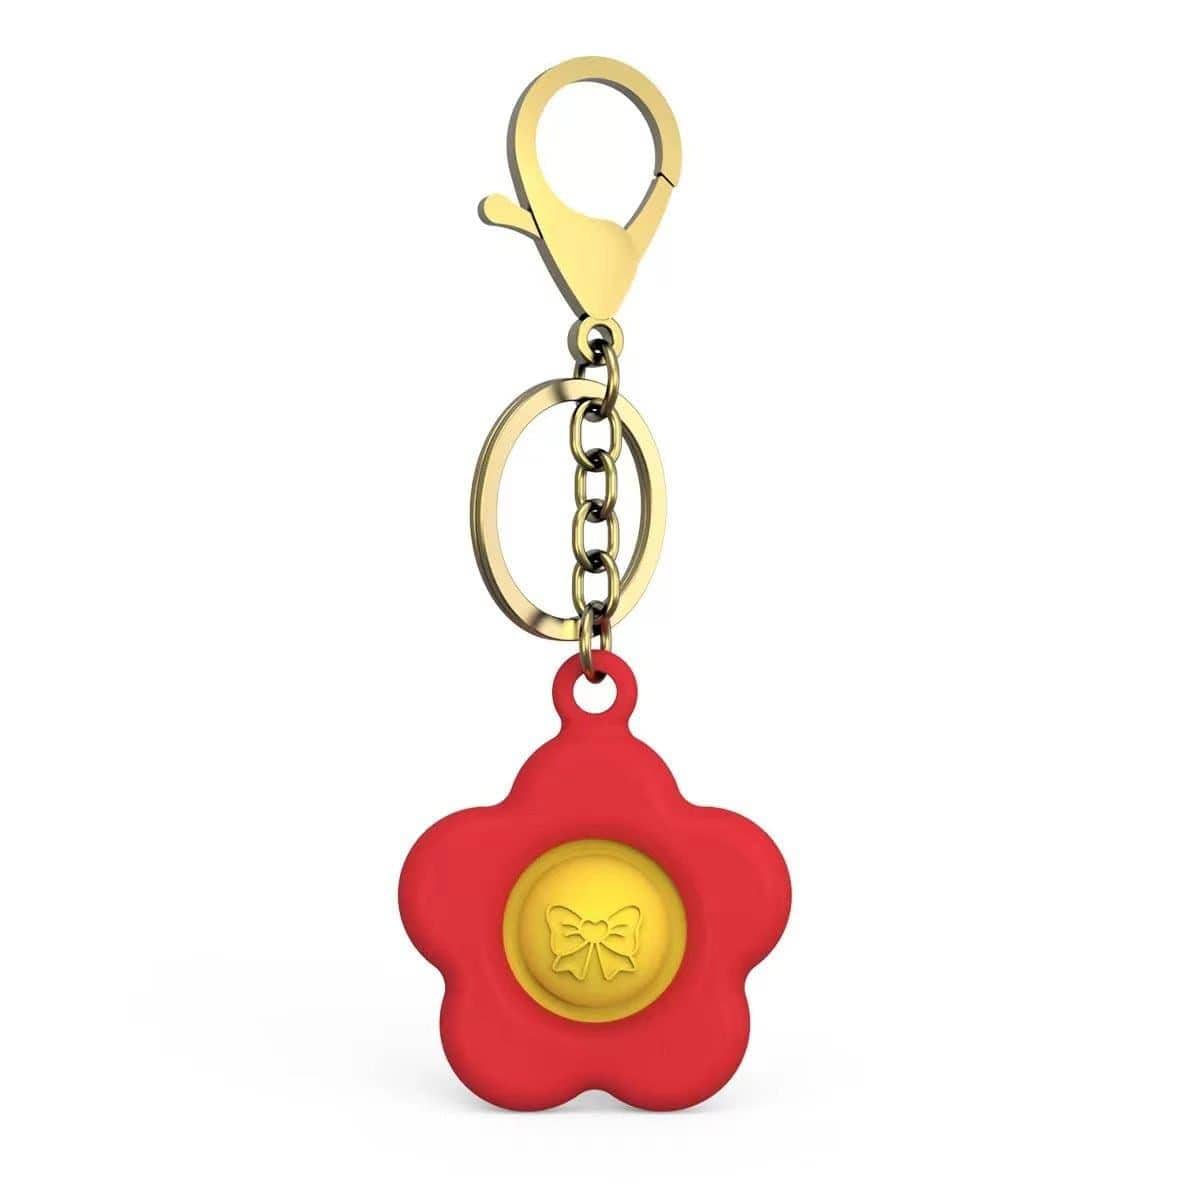 Buy Novelties Pop Keychain, Flower sold at Party Expert